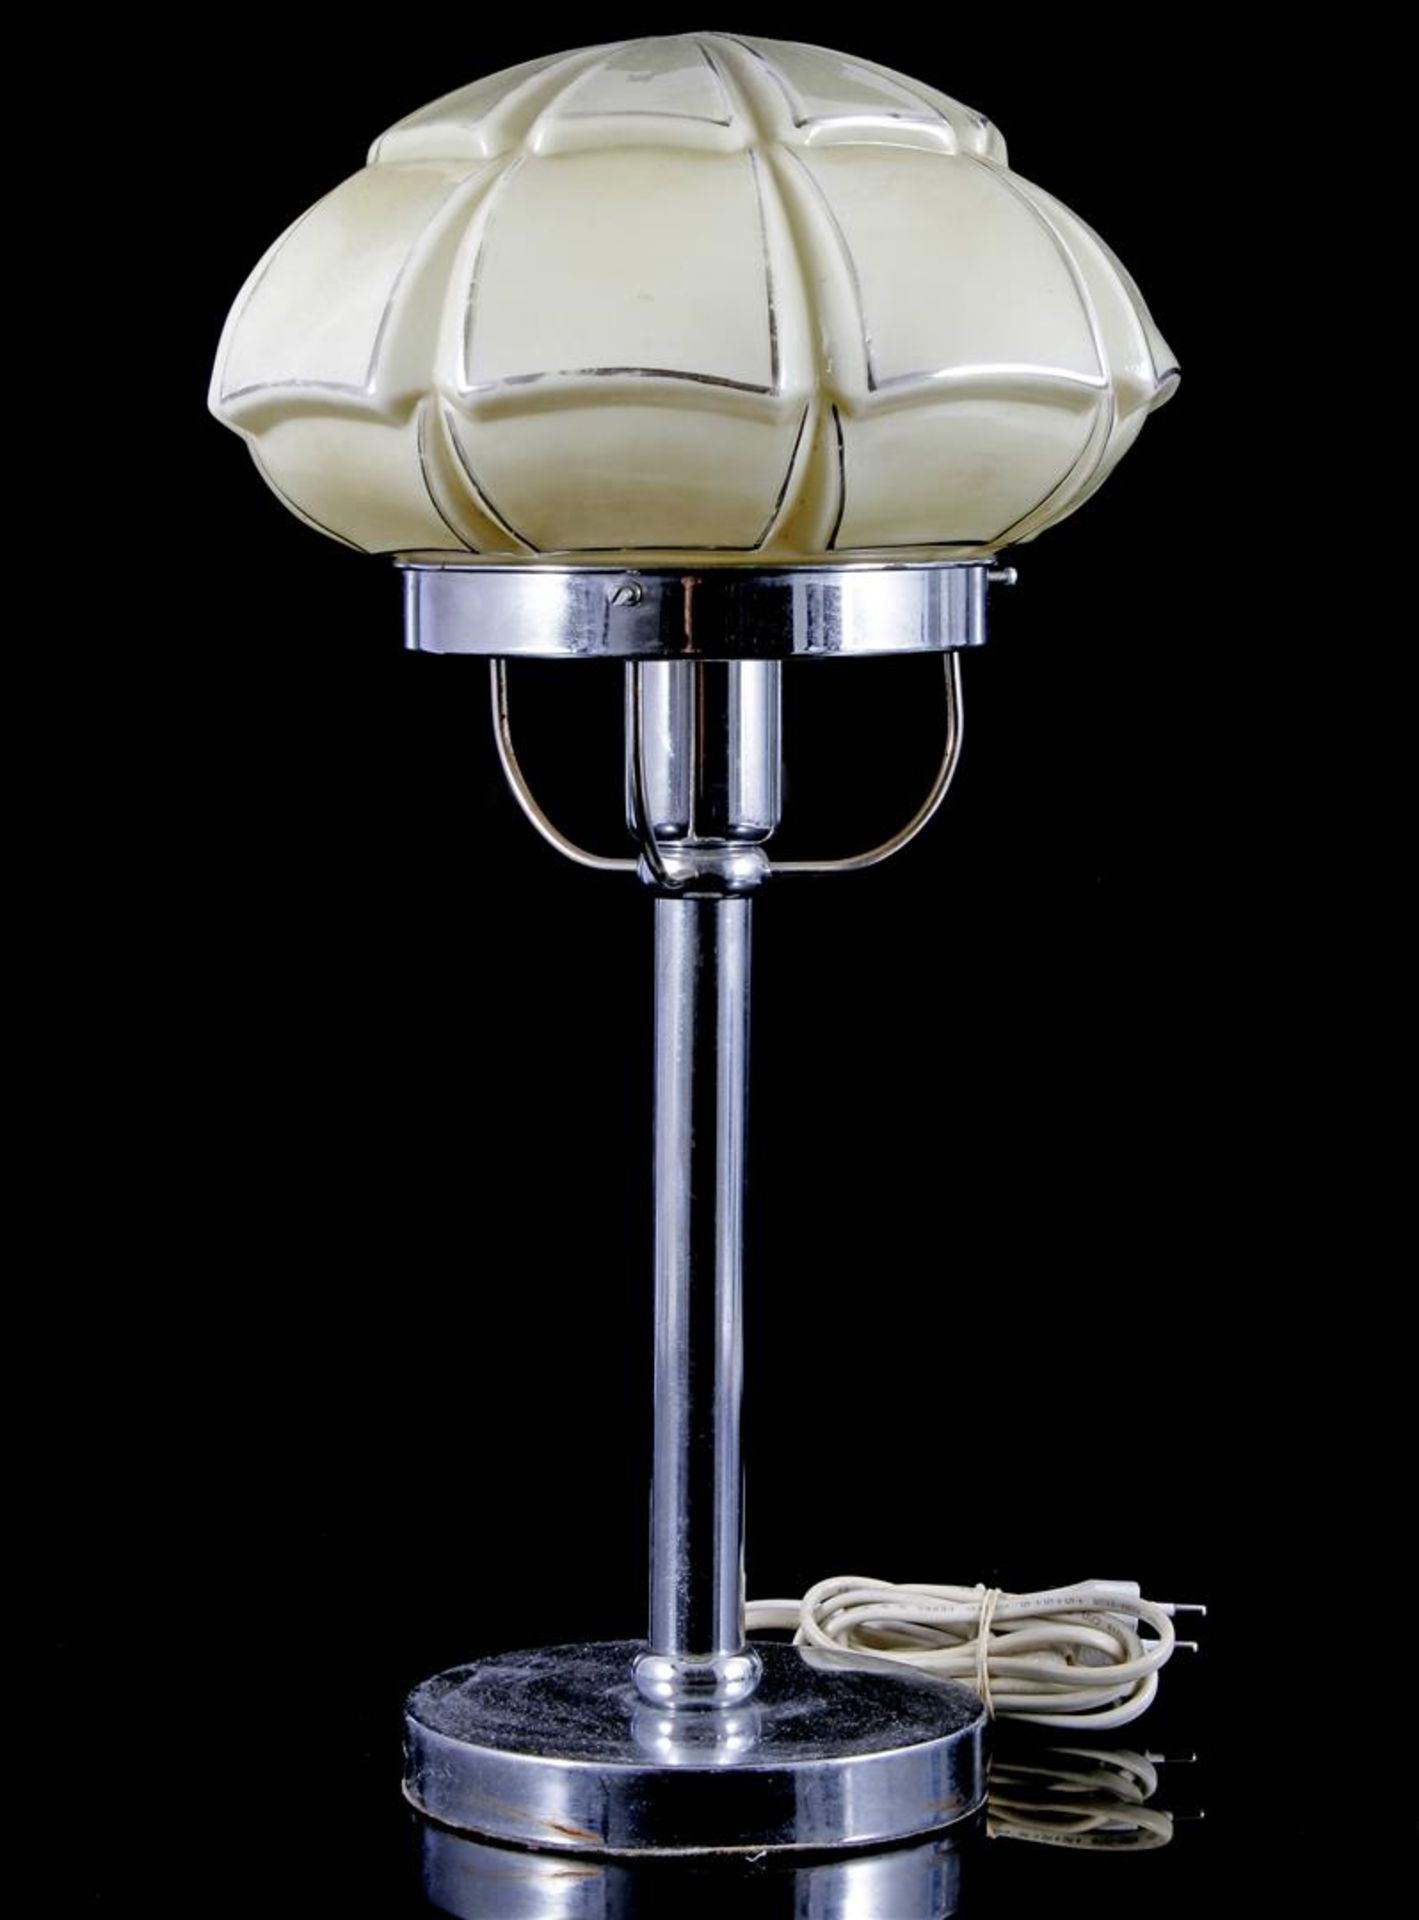 Metal table lamp with glass shade 45 cm high, shade 25 cm diameter (piece from hood flaw)